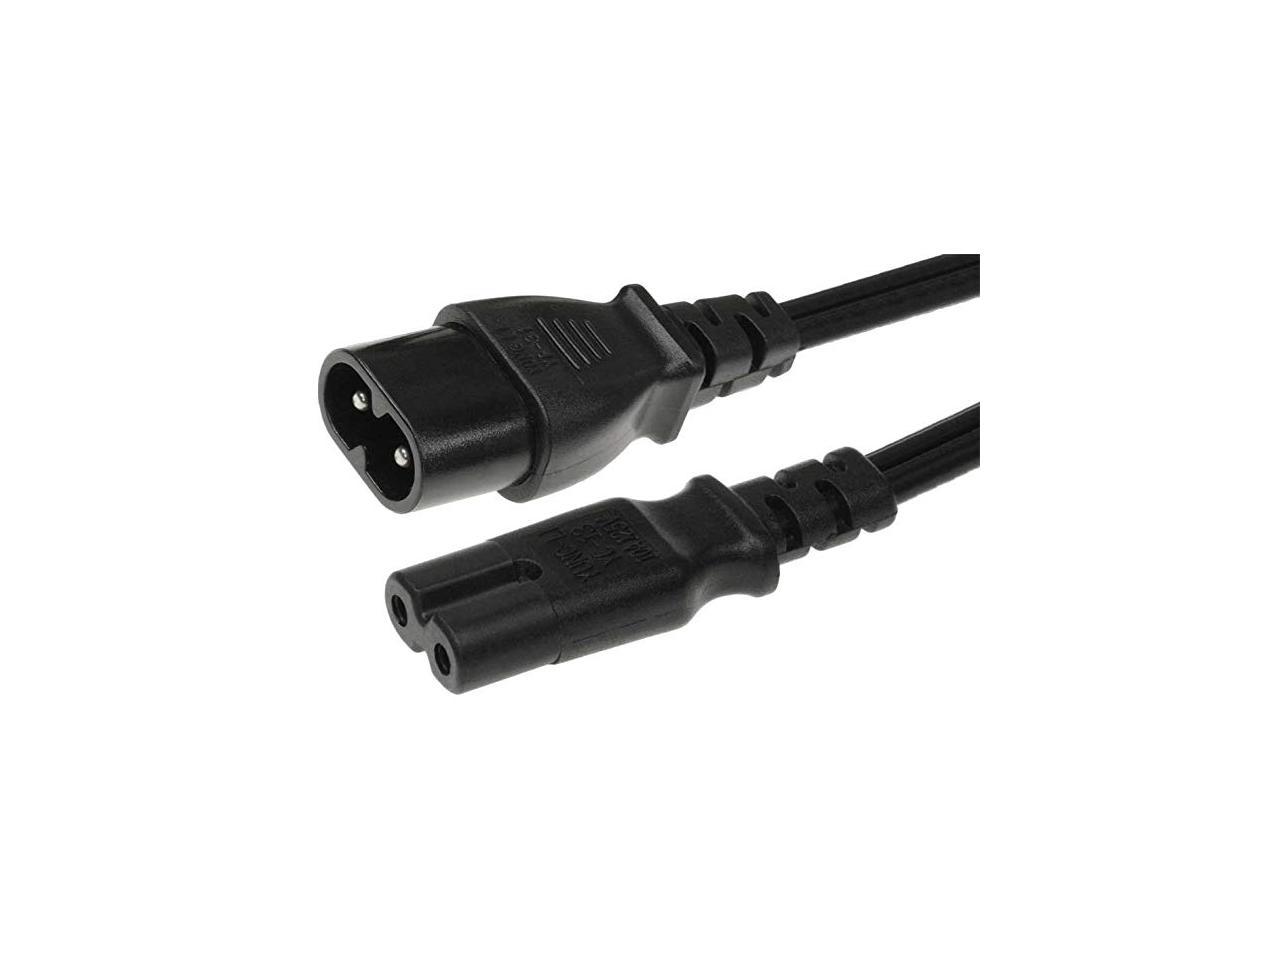 C7 To C8 Usa With 182 Spt 2 Extension Power Cord Iec 60320 C8 Plug To